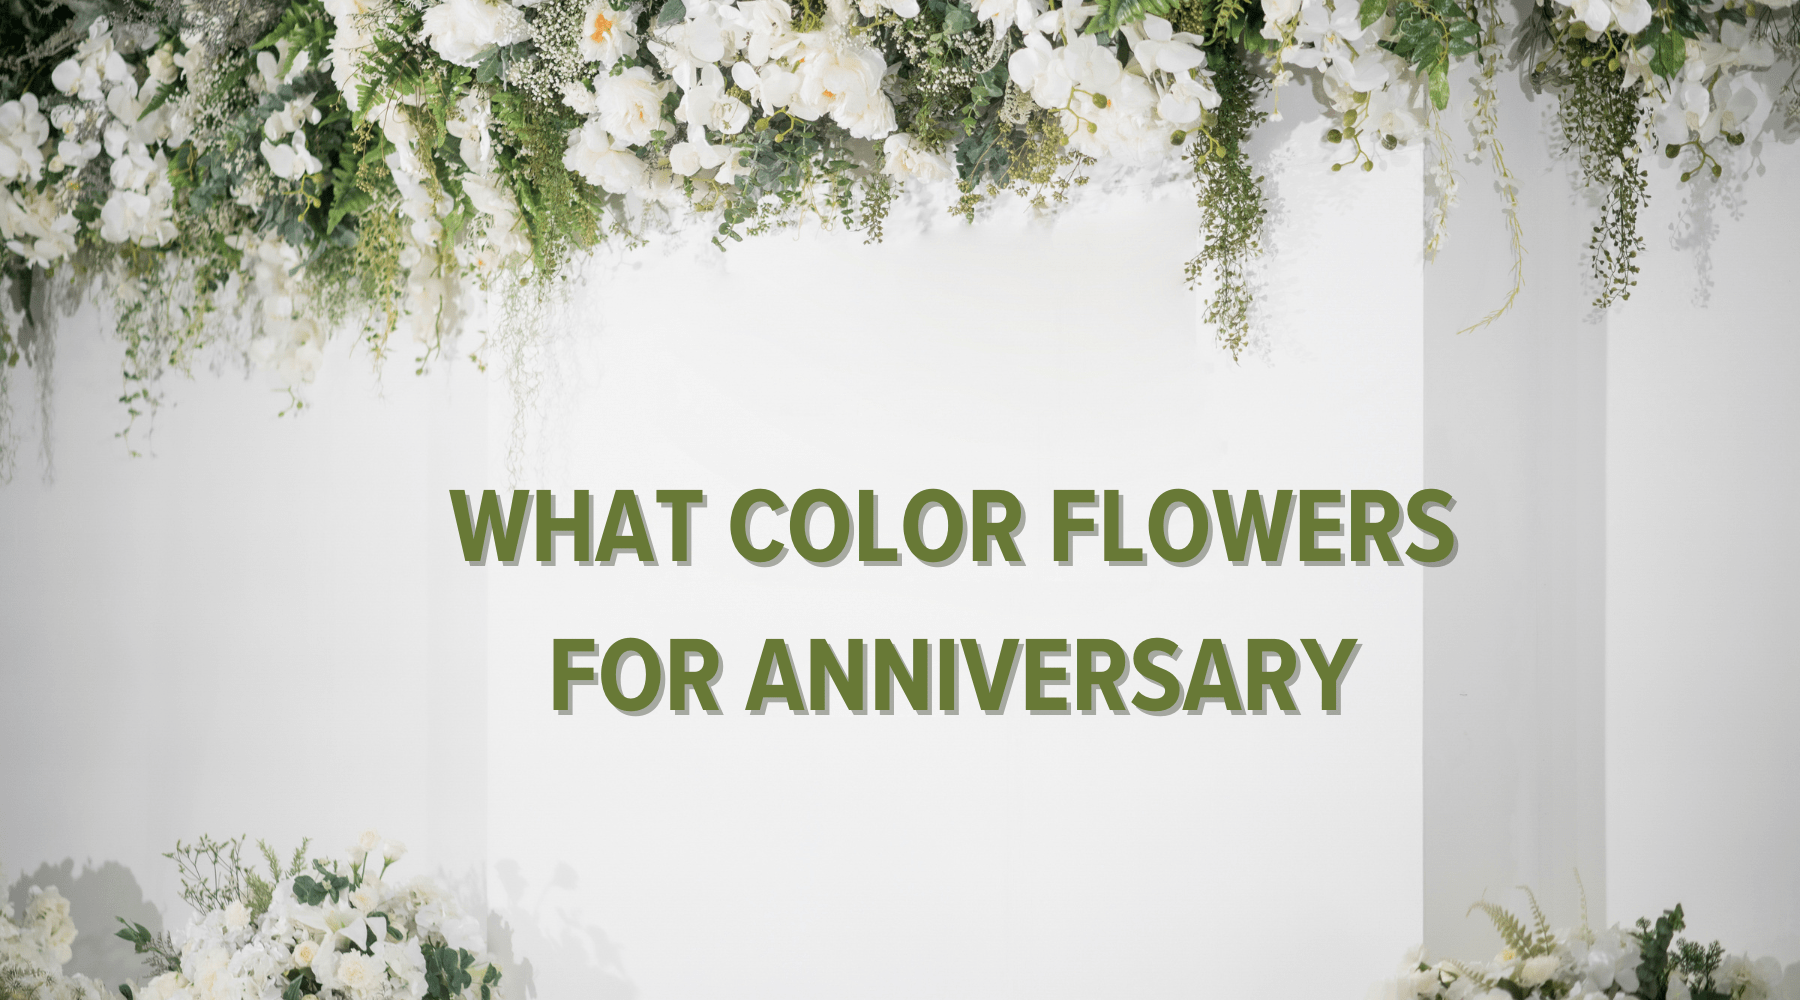 What Color Flowers For Anniversary